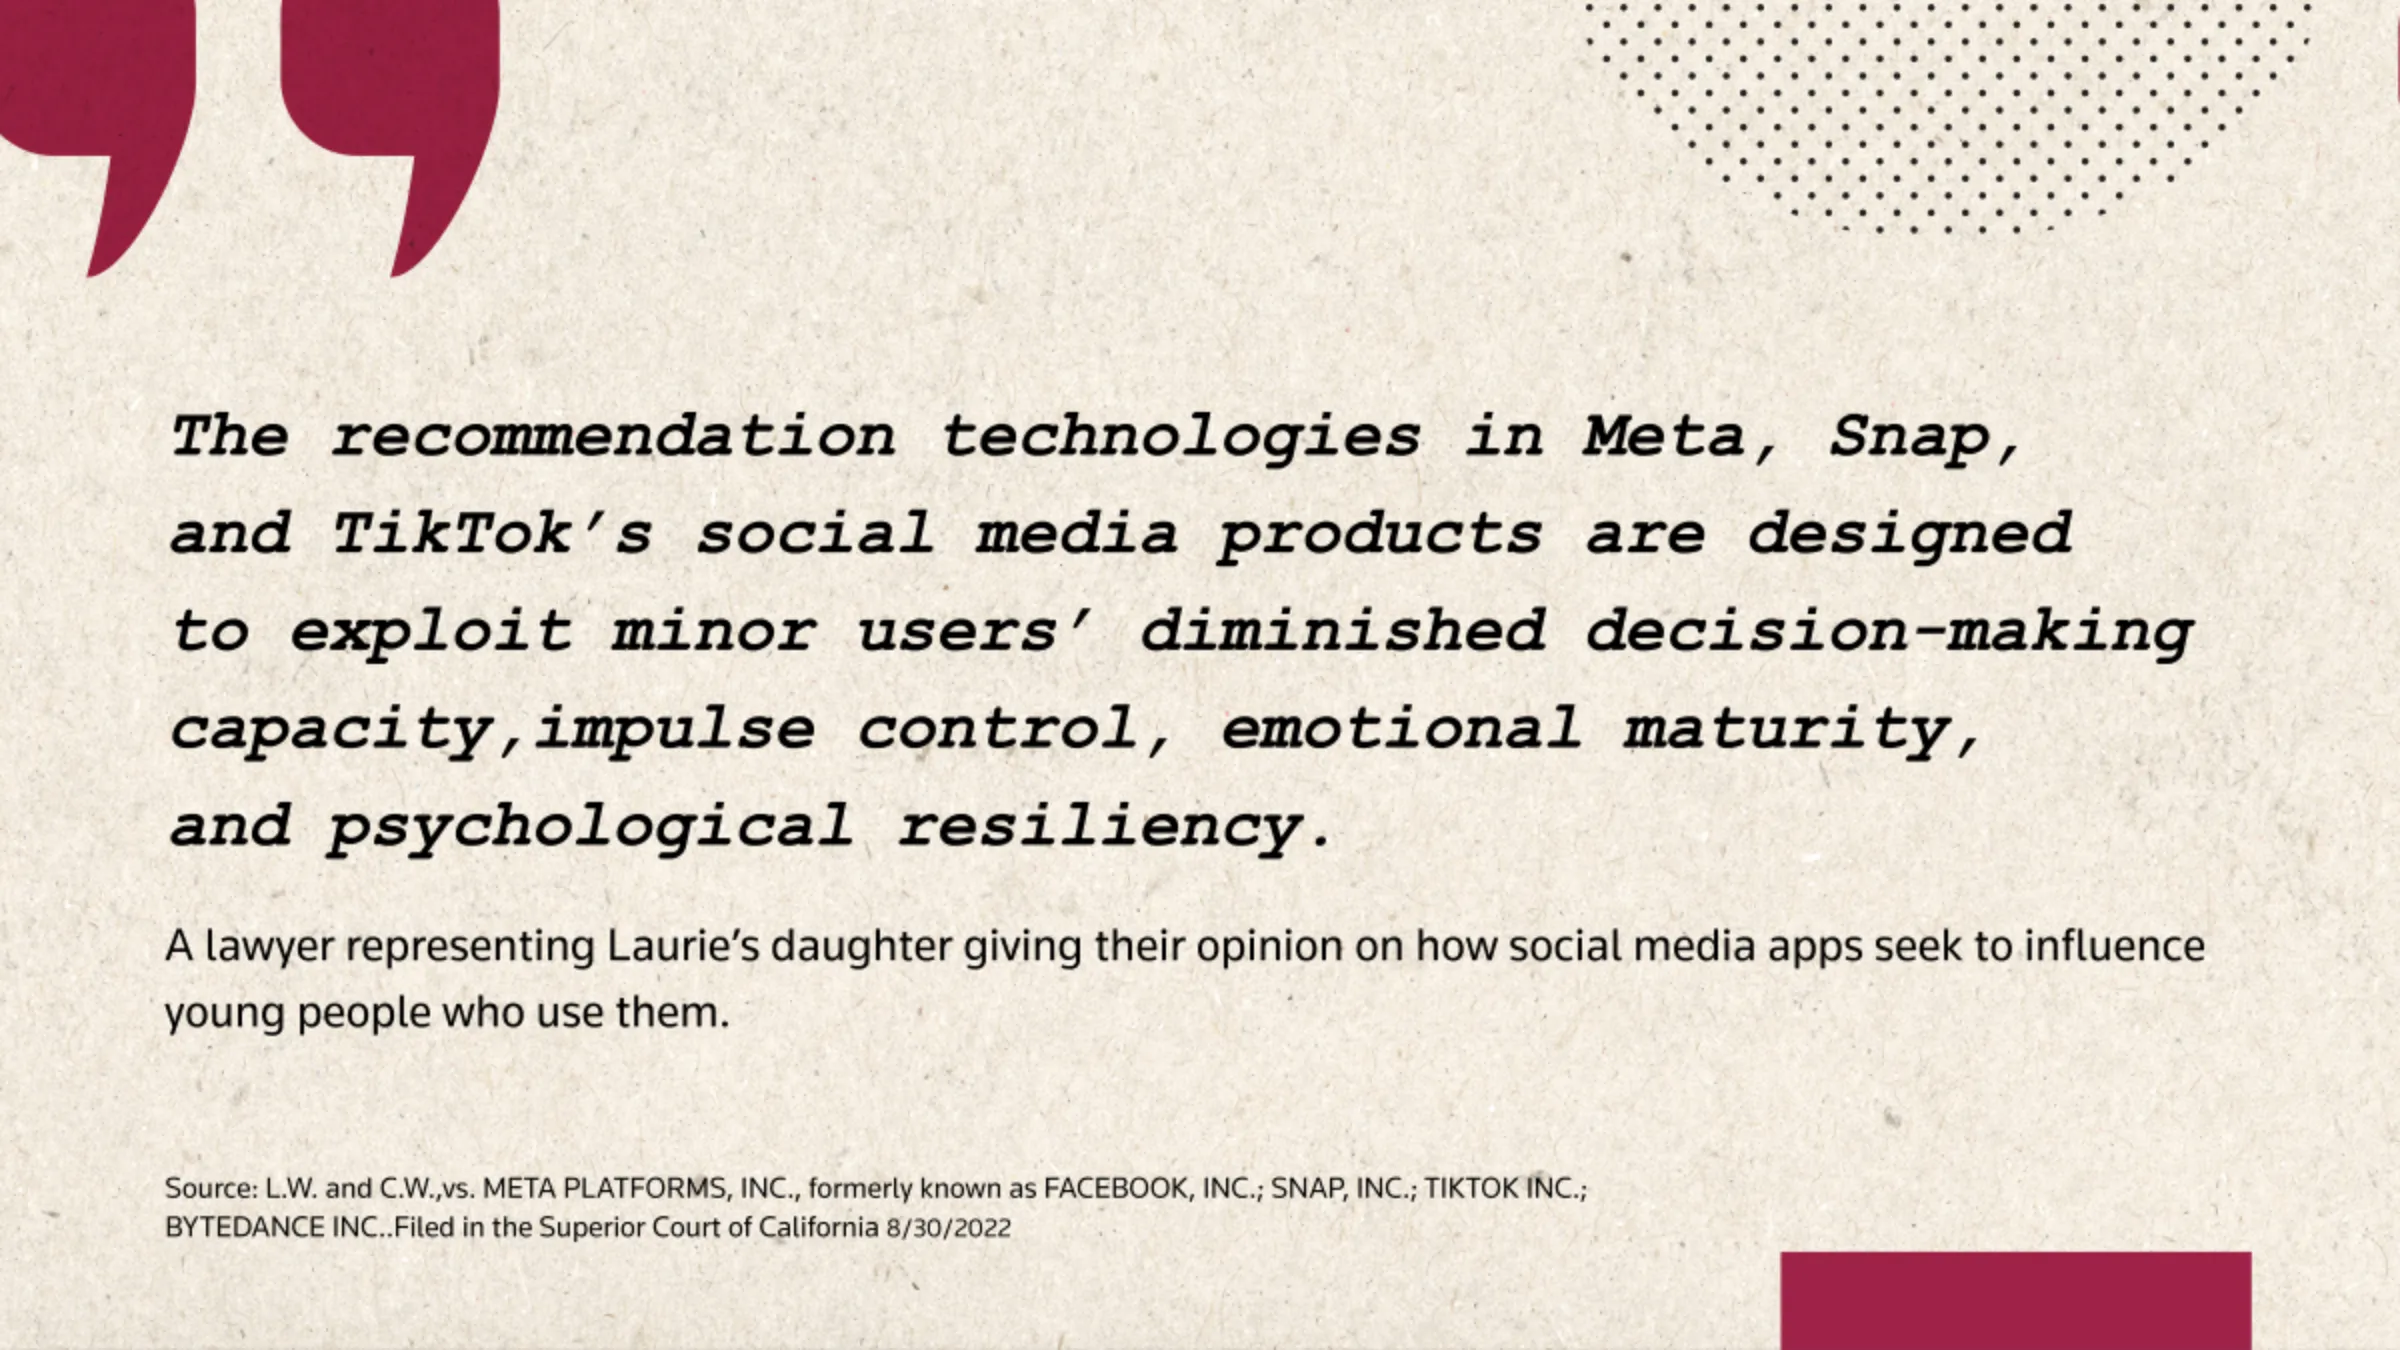 A quote card reads: 'The recommendation technologies in Meta, Snap, and TikTok's social media products are designed to exploit minor users' diminished decision-making capacity, impulse control, emotional maturity, and psychological resiliency.' 
- A lawyer representing Laurie's daughter giving their opinion on how social media apps seek to influence young people who use them.
L.W. and C.W.,vs. META PLATFORMS, INC., formerly known as FACEBOOK, INC.; SNAP, INC.; TIKTOK INC.; BYTEDANCE INC.